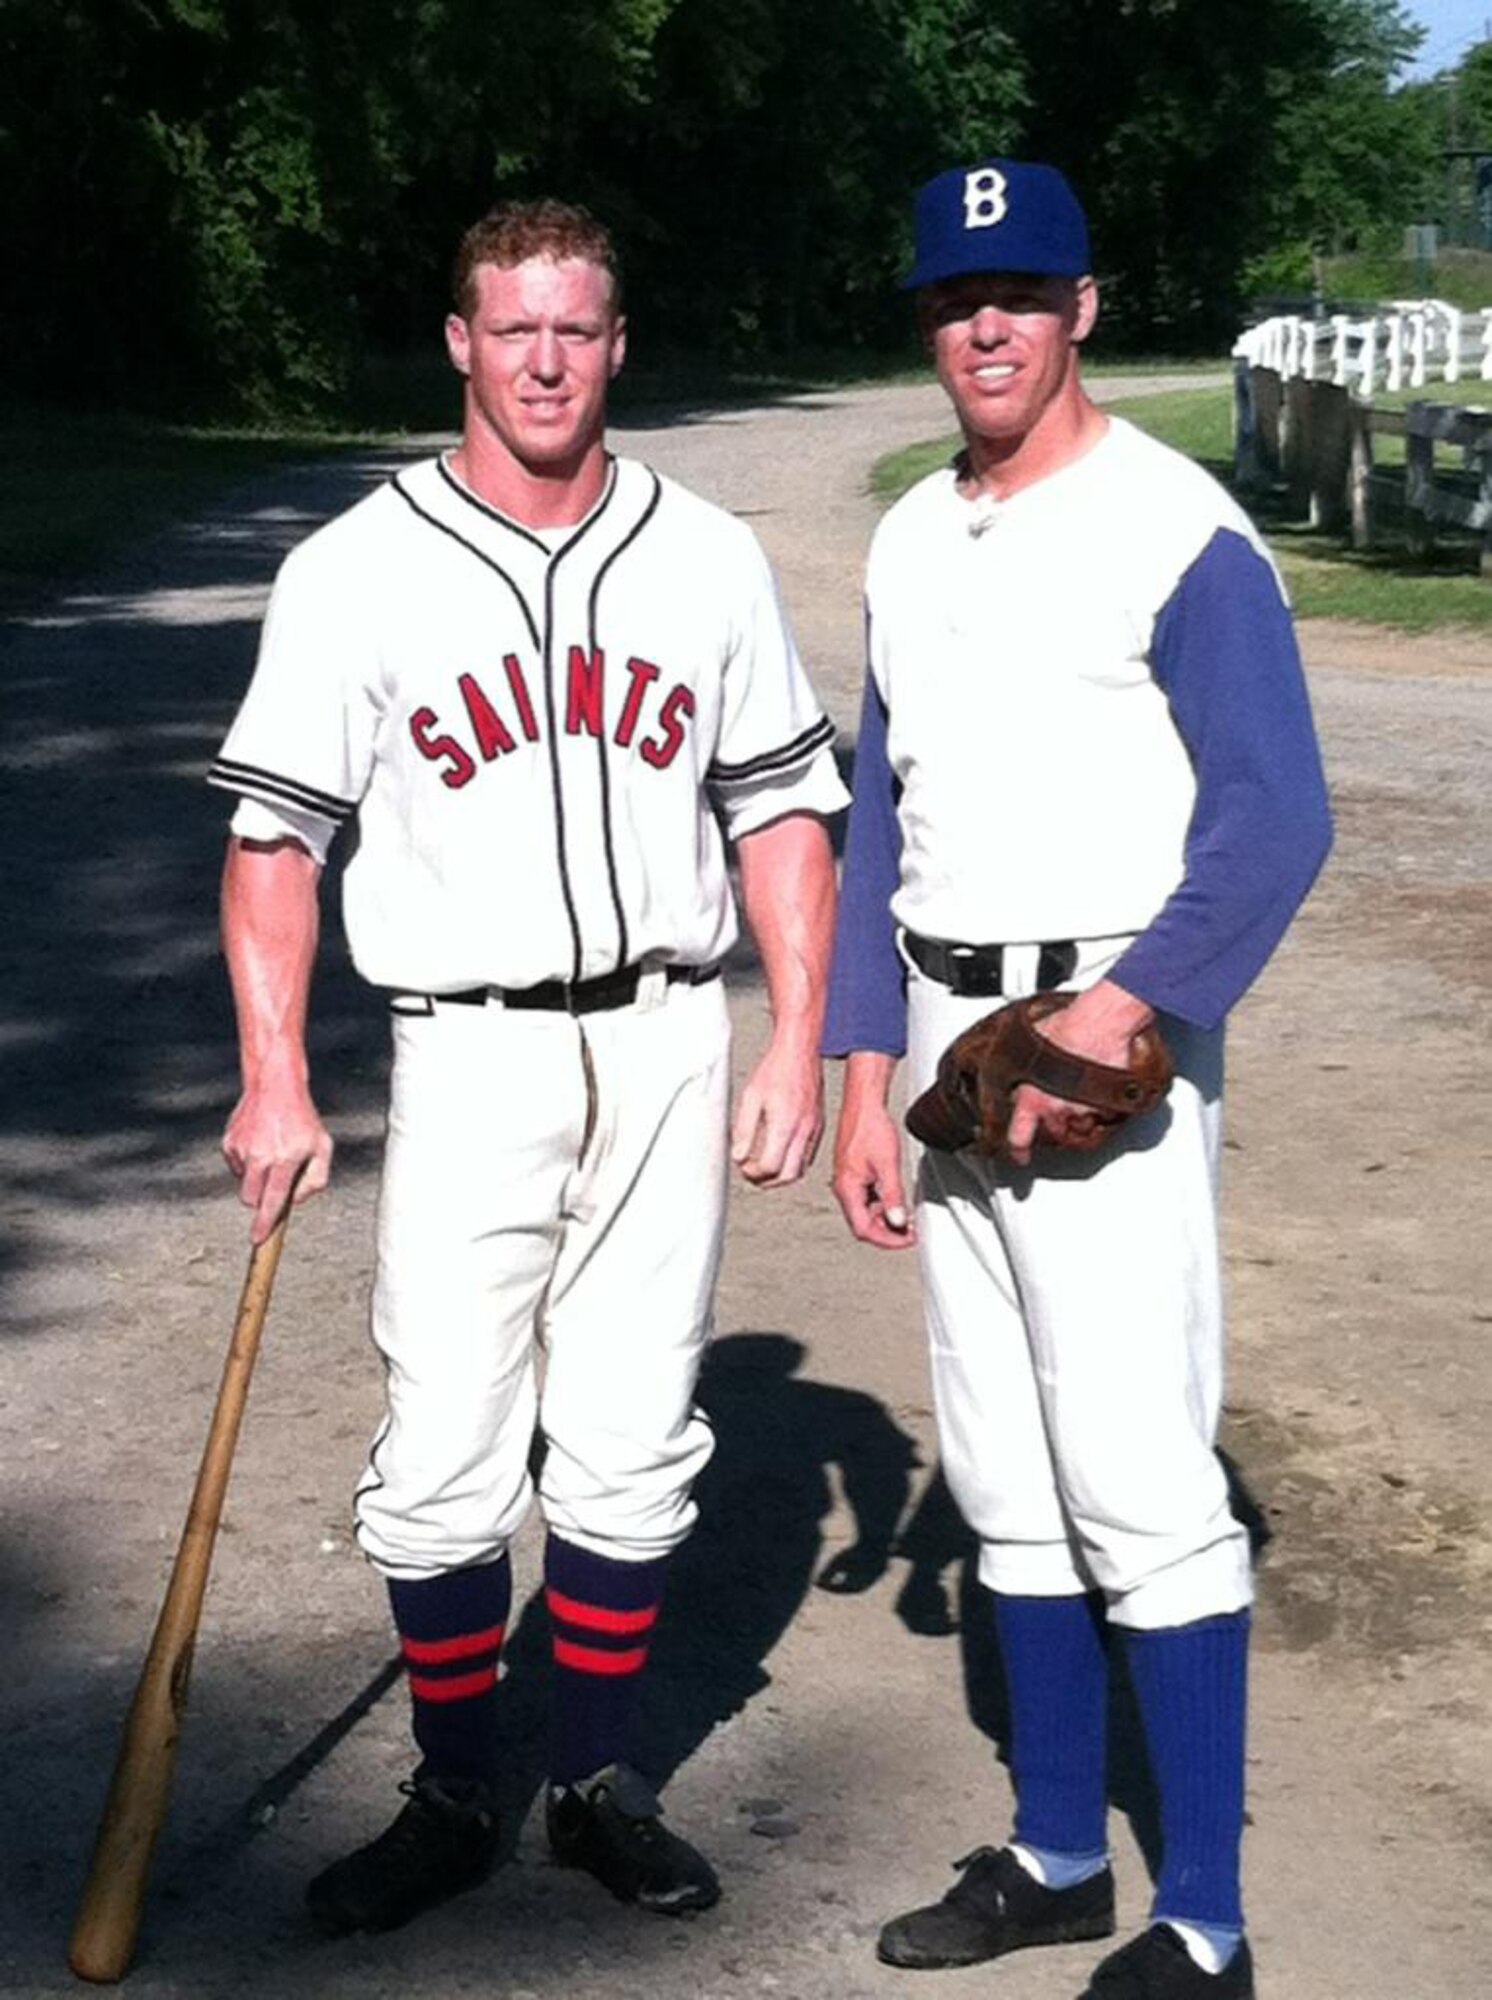 Reserve Master Sgt. Scotty Brown, right, and his brother, Joe, pose in vintage 1940s baseball uniforms during filming of "42," a biopic about baseball legend and civil rights activist Jackie Robinson. The brothers were selected to serve as extras during filming in Macon, Ga. (Photo courtesy of Scotty Brown)